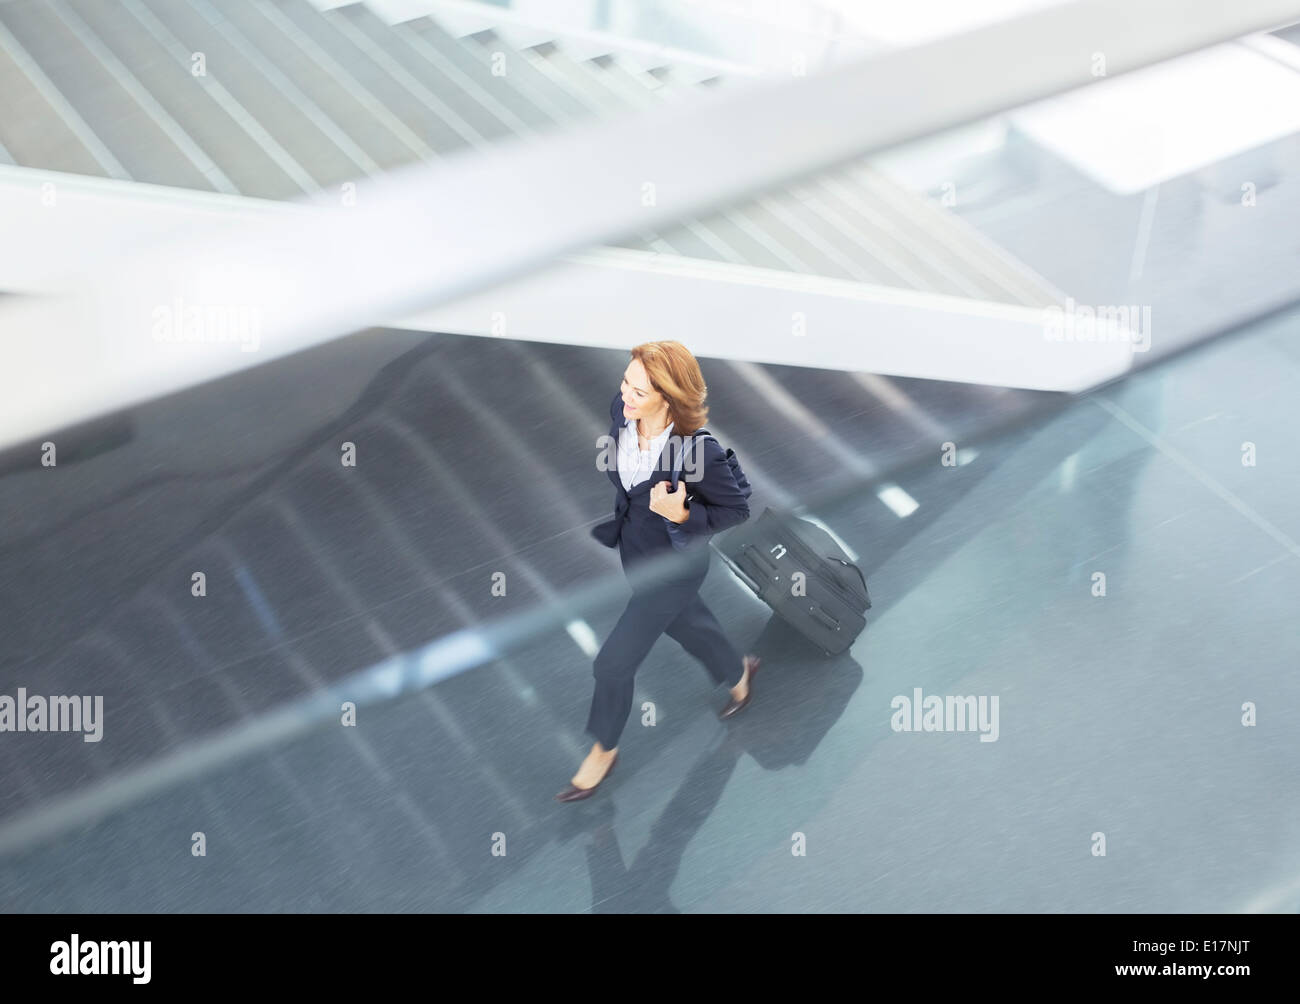 Businesswoman pulling suitcase in lobby Stock Photo